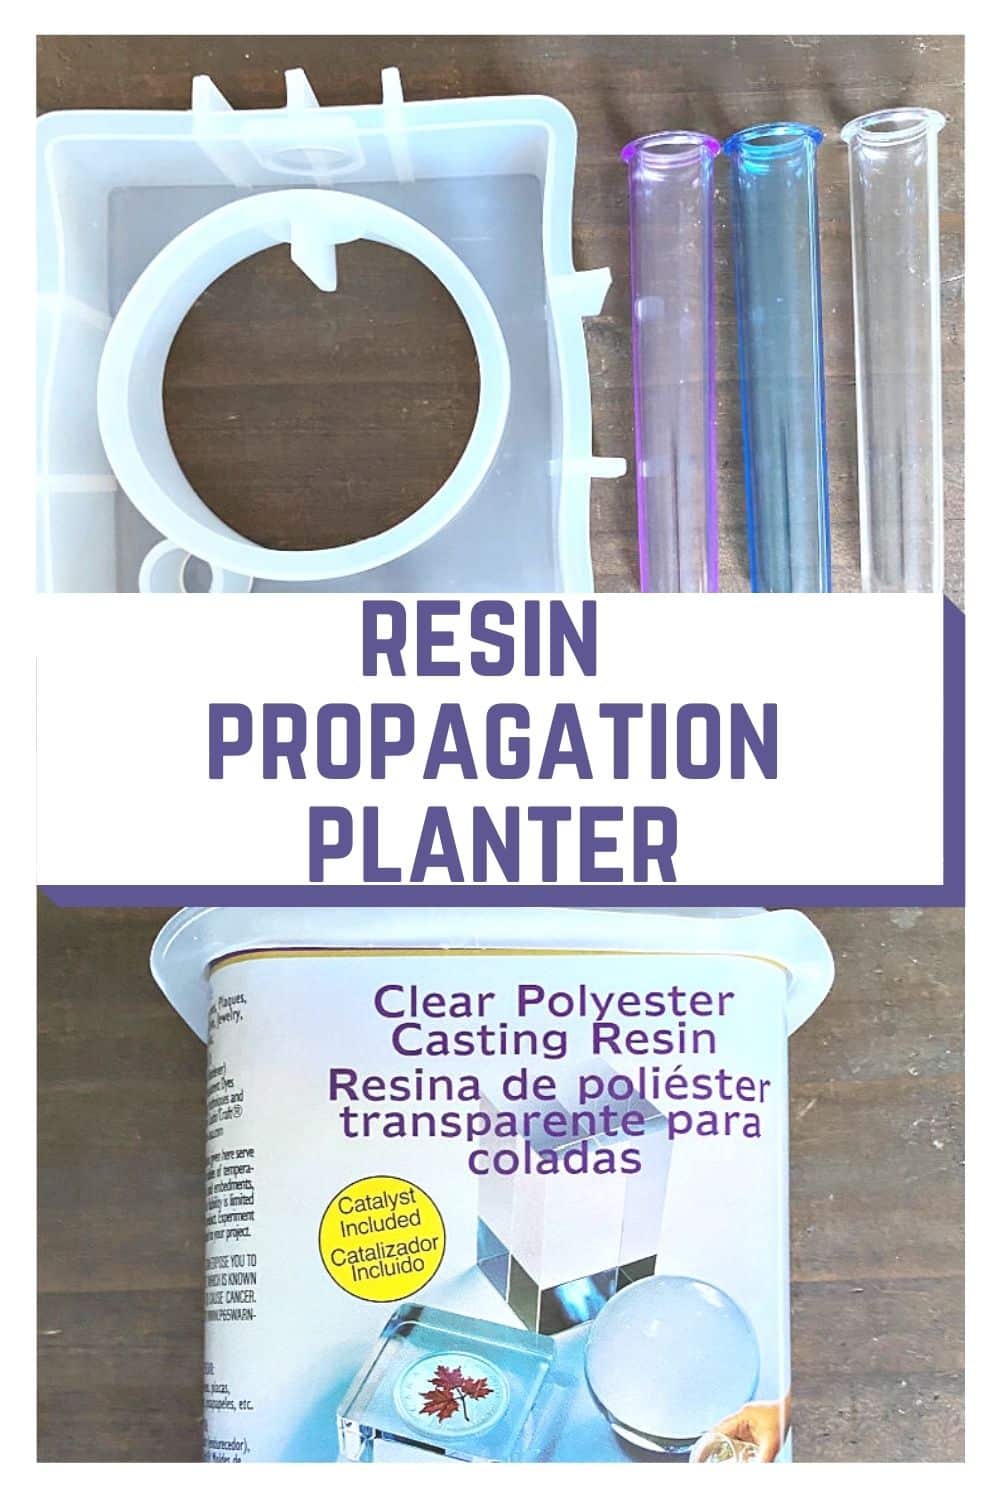 Learn how to make a modern polyester casting resin propagation planter that will look beautiful in any style home. @ourcraftymom @resincraftsblog #ourcraftymom #resincraftsblog #resinpropagationplanter #diypropagationplanter via @resincraftsblog